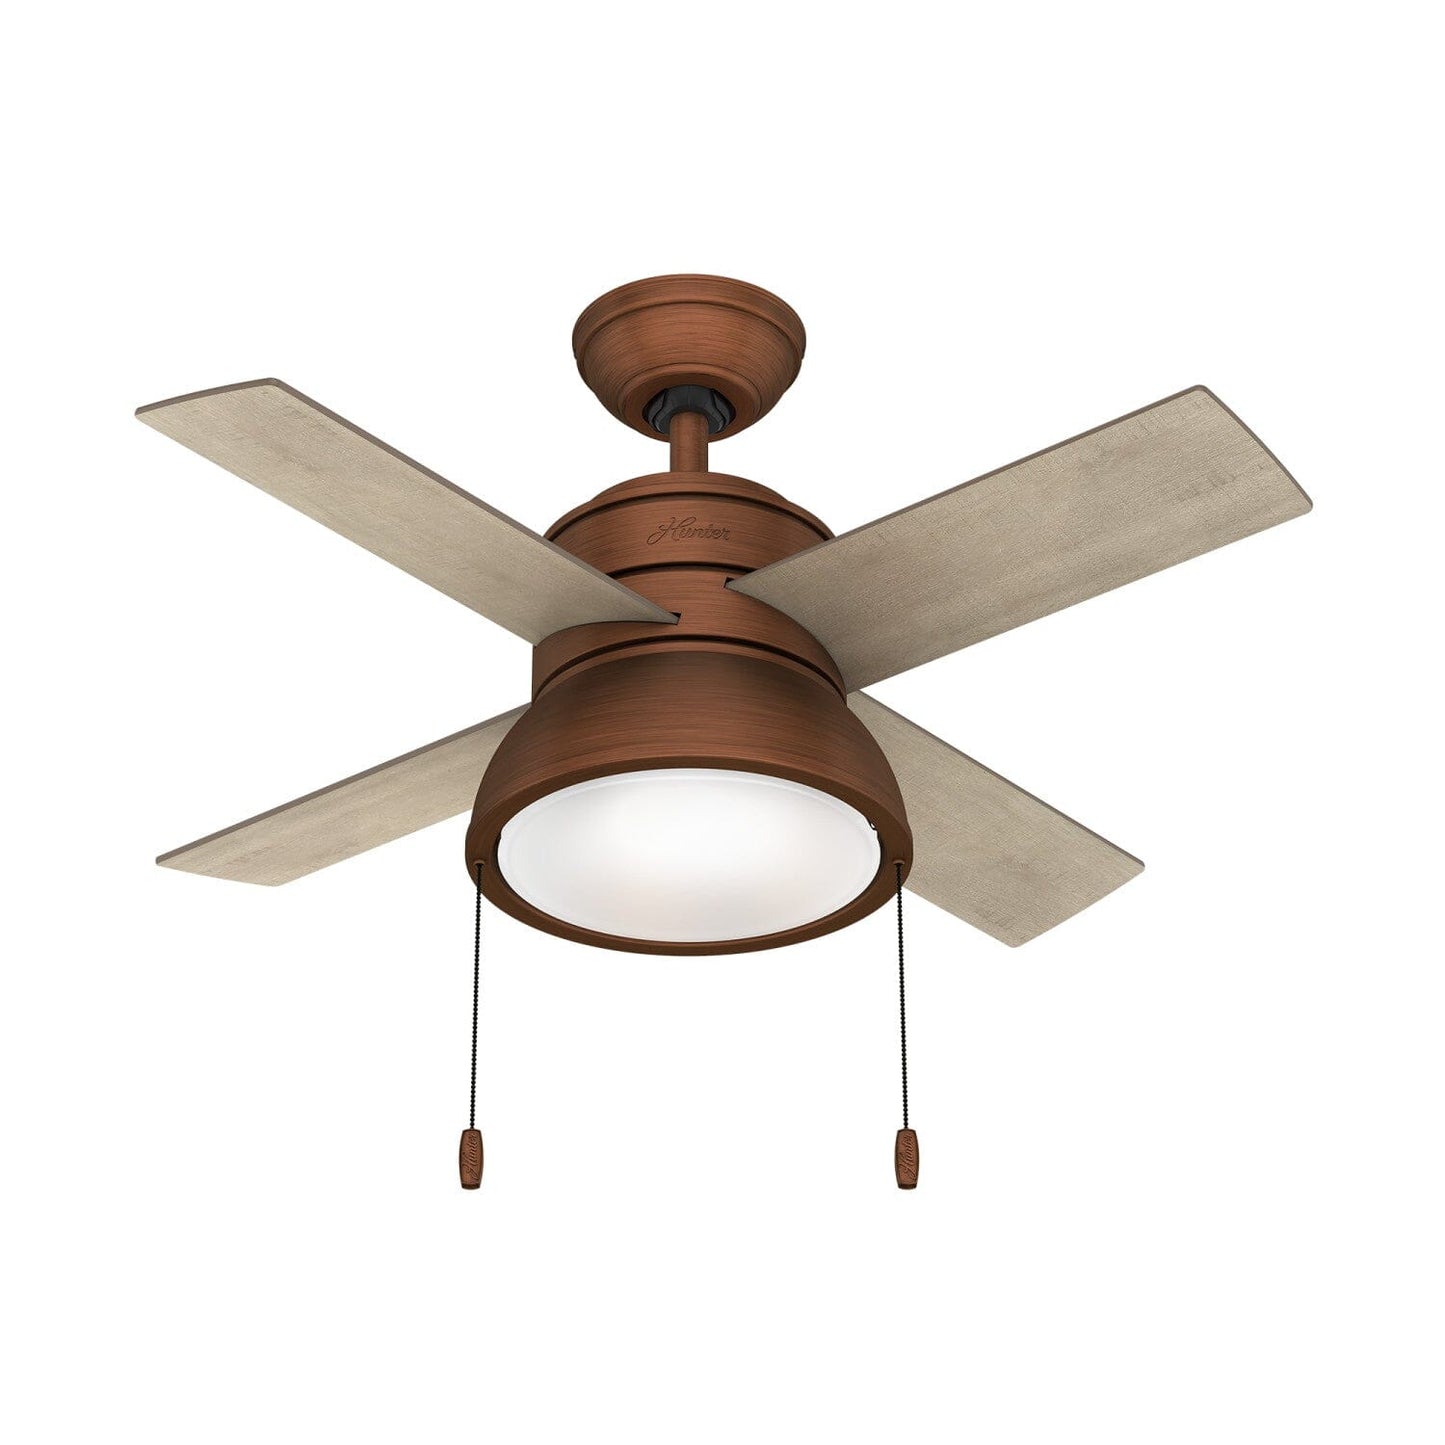 LOKI WITH LED LIGHT 36 INCH Ceiling Fans Hunter Weathered Copper - Barnwood 